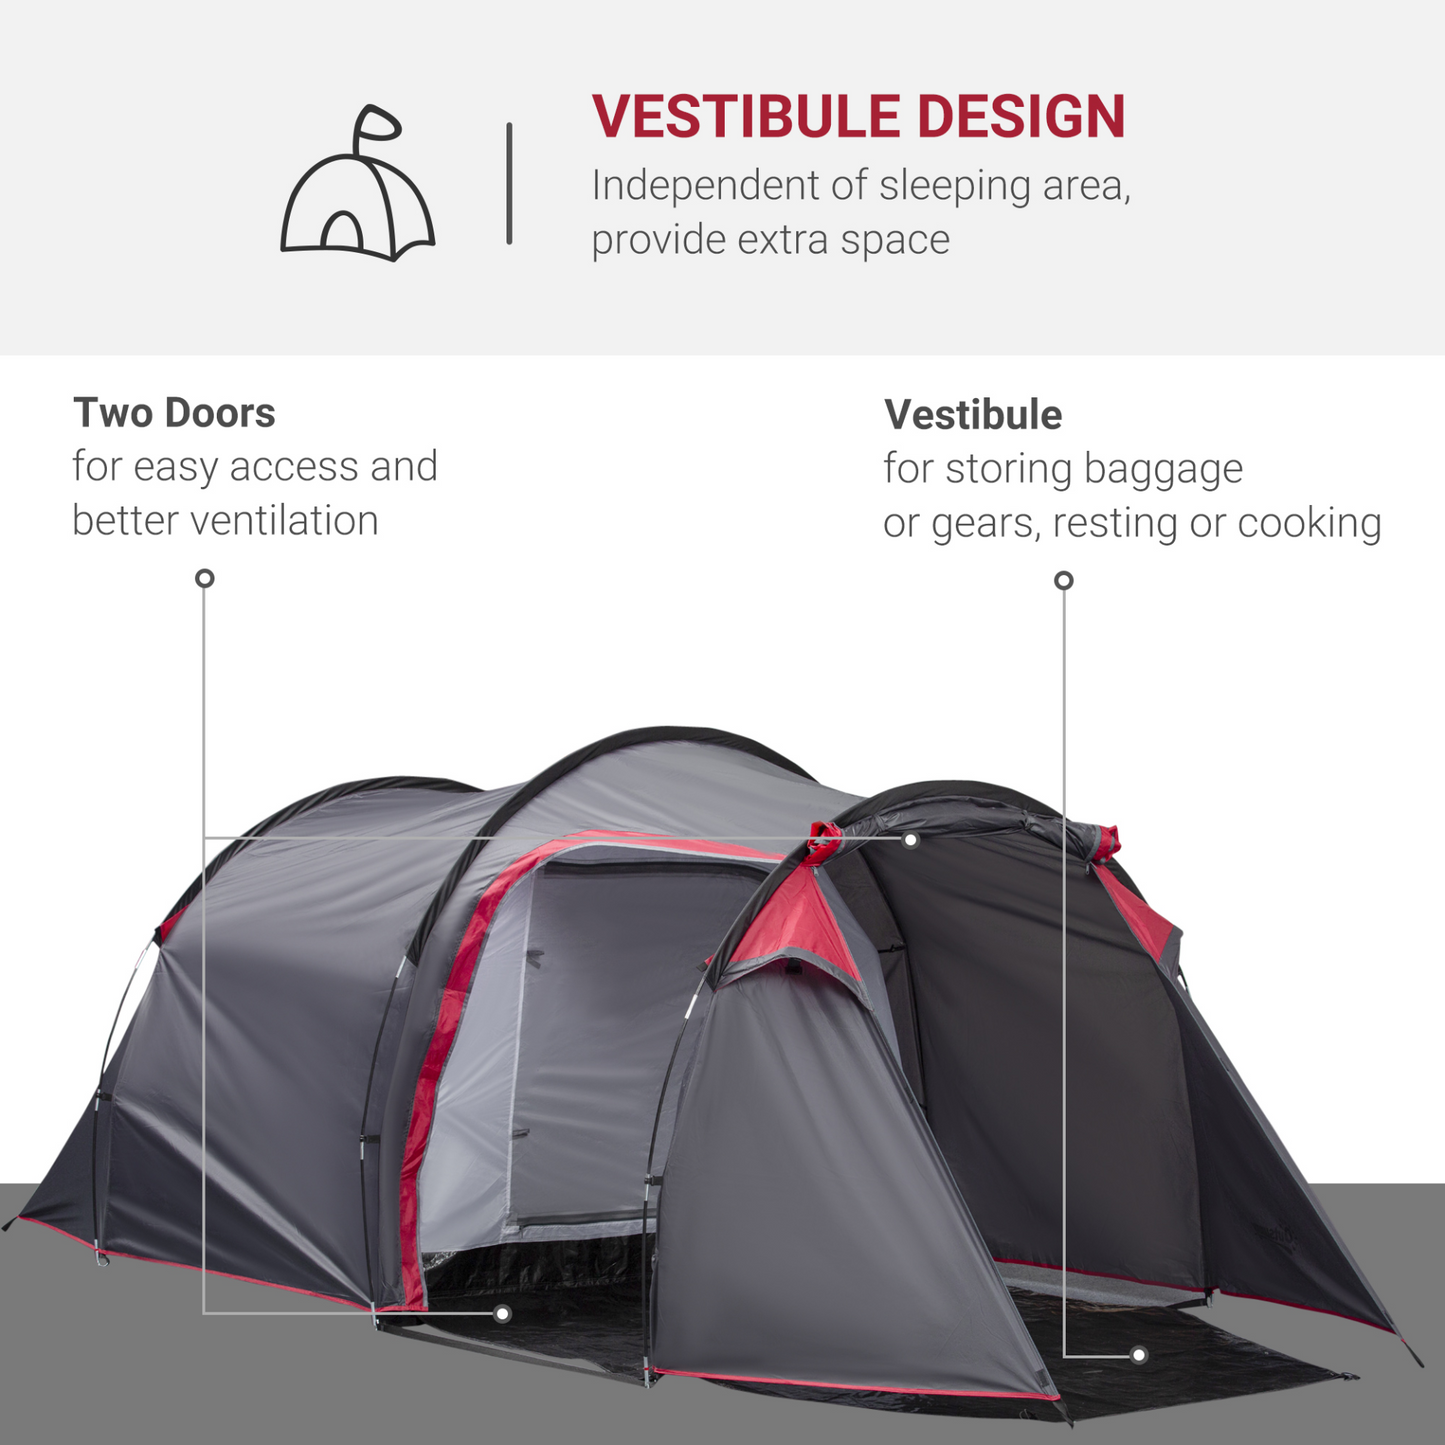 Outsunny 2-3 Man Tunnel Tents w/ Vestibule Camping Tent Porch Air Vents Rainfly Weather-Resistant Shelter Fishing Hiking Festival Shelter Home, Dark Grey